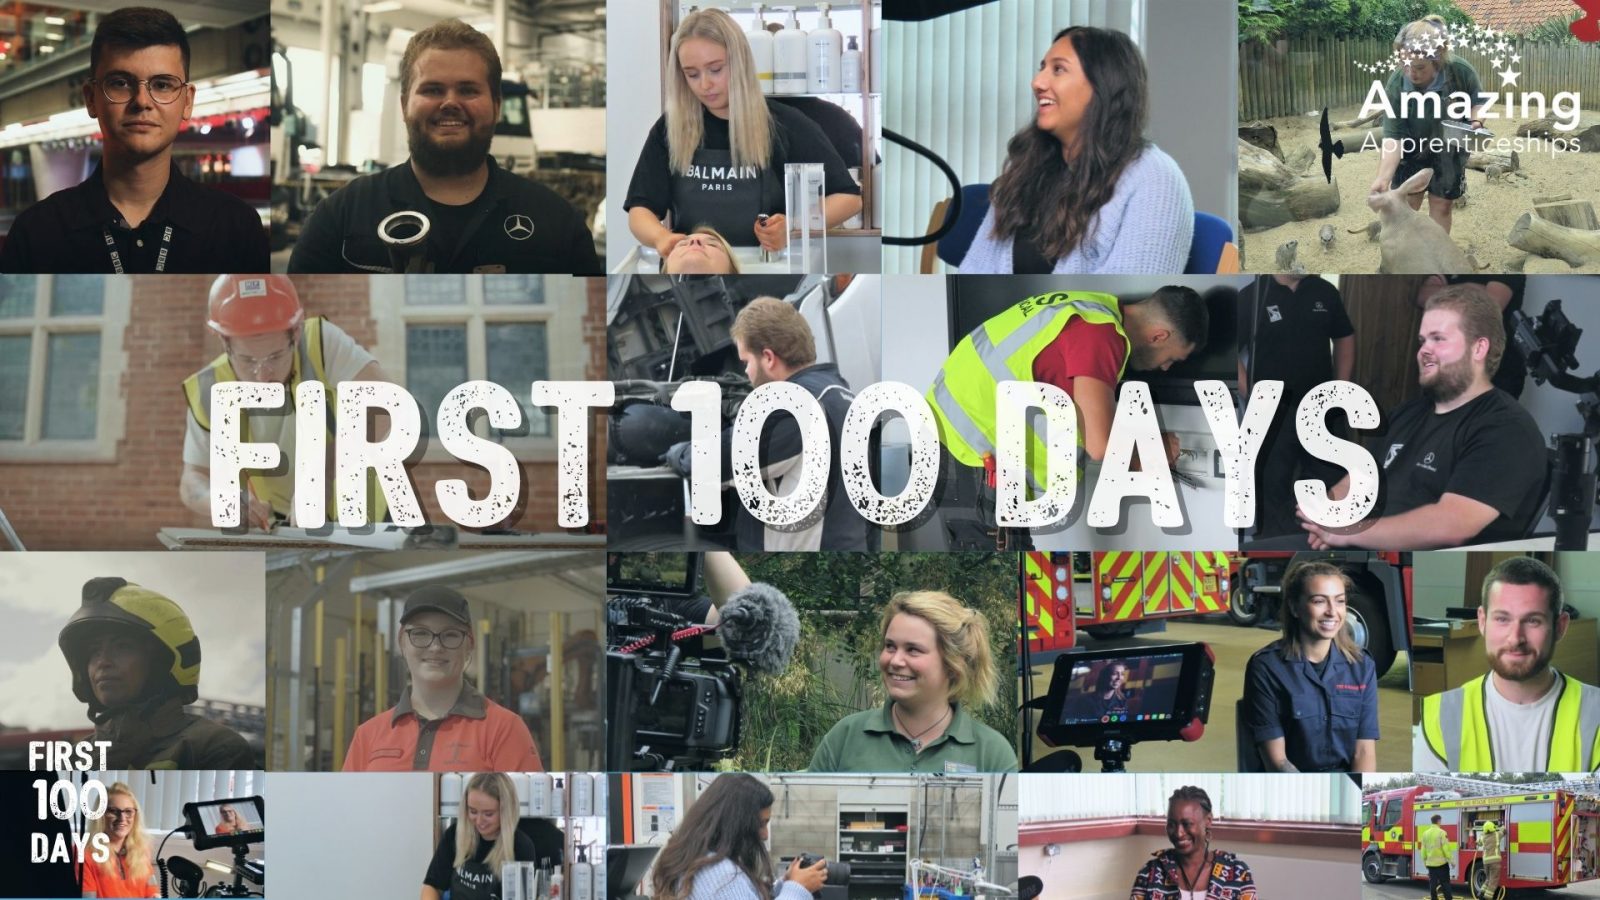 The first 100 days film